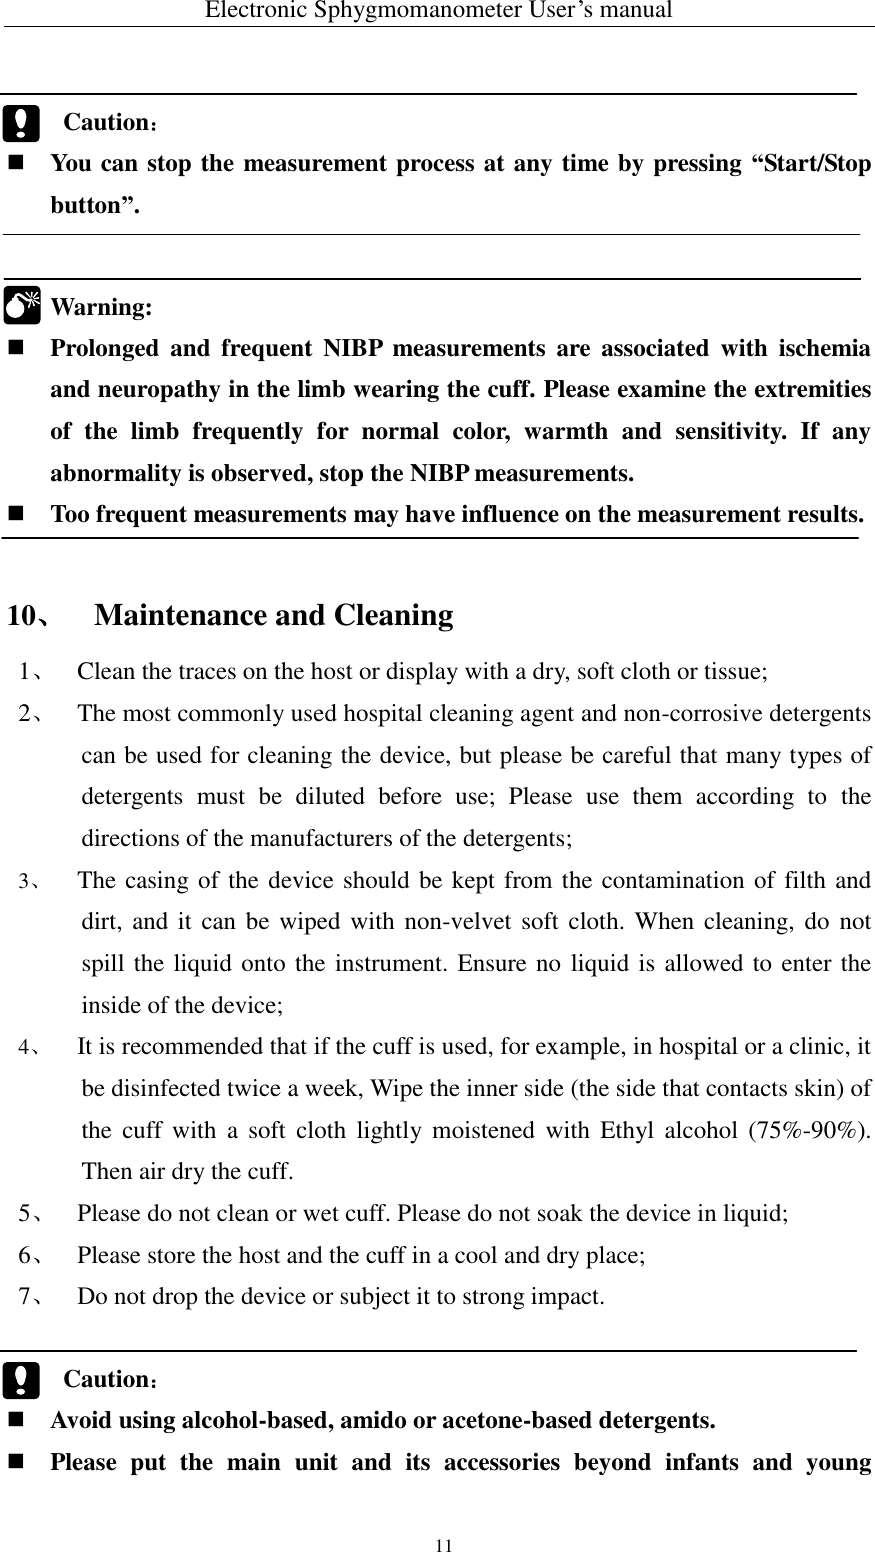 Electronic Sphygmomanometer User’s manual  11       Caution：  You can stop the measurement process at any time by pressing “Start/Stop button”.    Warning:    Prolonged  and  frequent  NIBP  measurements  are  associated  with  ischemia and neuropathy in the limb wearing the cuff. Please examine the extremities of  the  limb  frequently  for  normal  color,  warmth  and  sensitivity.  If  any abnormality is observed, stop the NIBP measurements.  Too frequent measurements may have influence on the measurement results.   10、 Maintenance and Cleaning   1、 Clean the traces on the host or display with a dry, soft cloth or tissue; 2、 The most commonly used hospital cleaning agent and non-corrosive detergents can be used for cleaning the device, but please be careful that many types of detergents  must  be  diluted  before  use;  Please  use  them  according  to  the directions of the manufacturers of the detergents; 3、 The casing of the device should be kept from the contamination of filth and dirt, and it  can be  wiped  with  non-velvet soft  cloth. When  cleaning, do not spill the liquid onto the instrument. Ensure no liquid is allowed to enter the inside of the device; 4、 It is recommended that if the cuff is used, for example, in hospital or a clinic, it be disinfected twice a week, Wipe the inner side (the side that contacts skin) of the  cuff  with  a  soft  cloth  lightly  moistened  with  Ethyl  alcohol  (75%-90%). Then air dry the cuff. 5、 Please do not clean or wet cuff. Please do not soak the device in liquid; 6、 Please store the host and the cuff in a cool and dry place; 7、 Do not drop the device or subject it to strong impact.     Caution：  Avoid using alcohol-based, amido or acetone-based detergents.  Please  put  the  main  unit  and  its  accessories  beyond  infants  and  young  